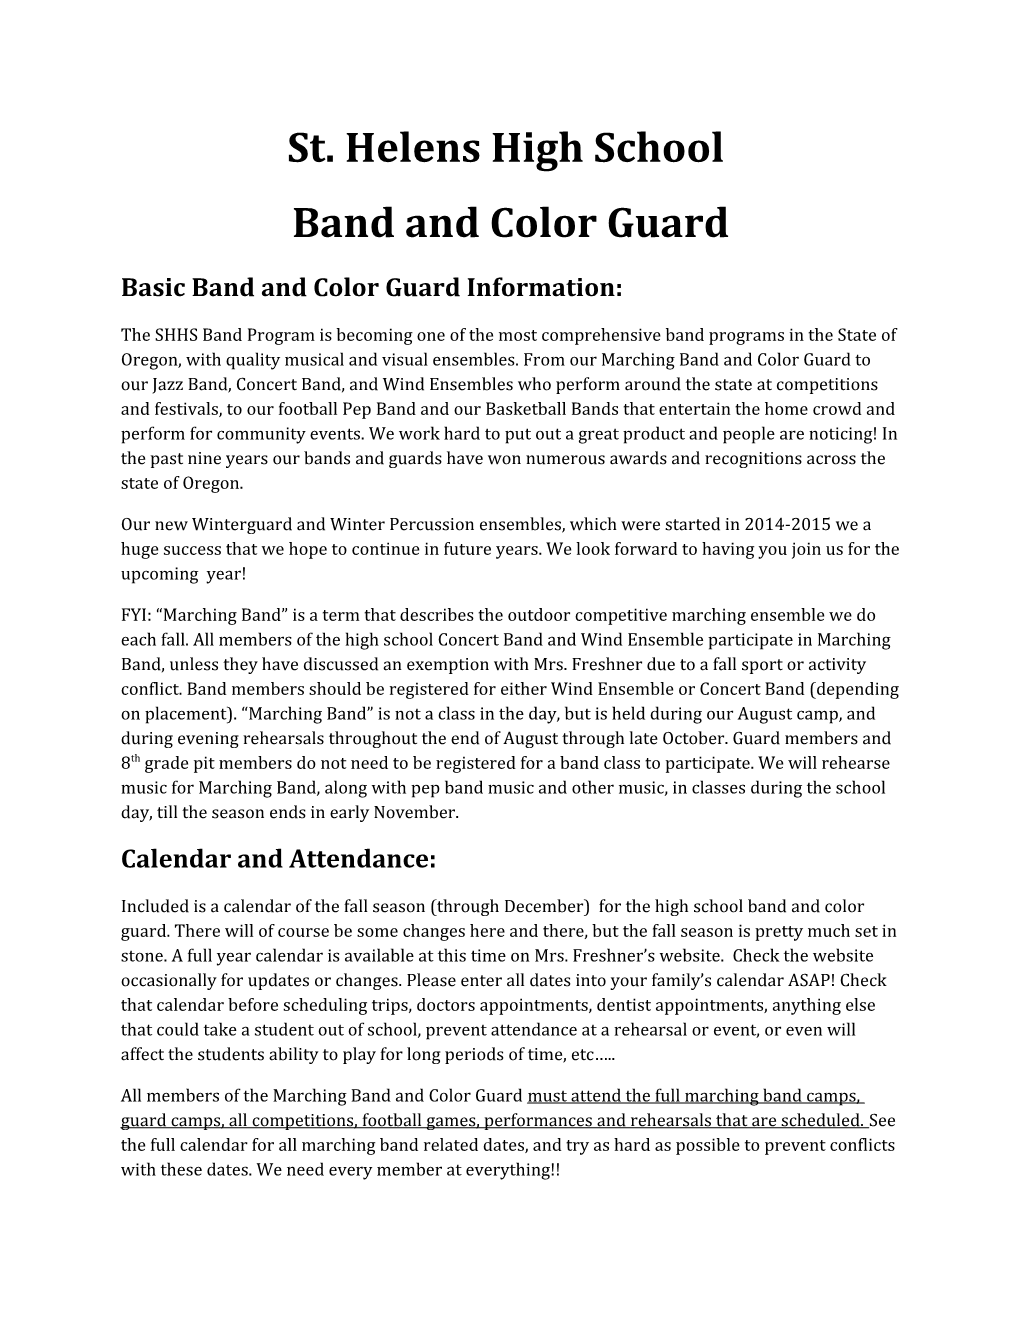 Band and Color Guard